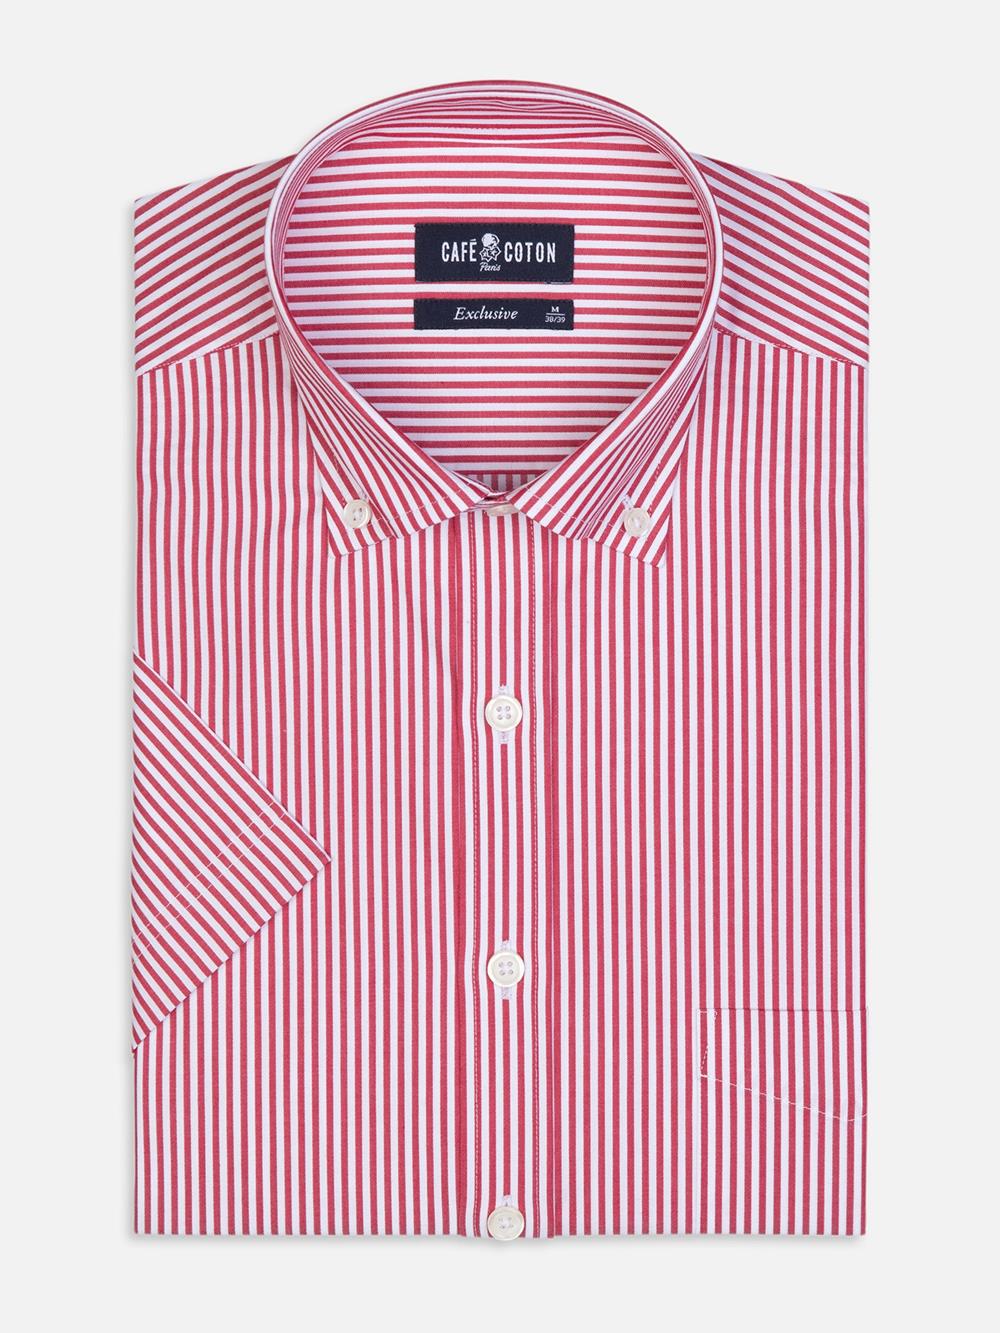 Barney red striped short sleeves shirt  - Buttoned collar